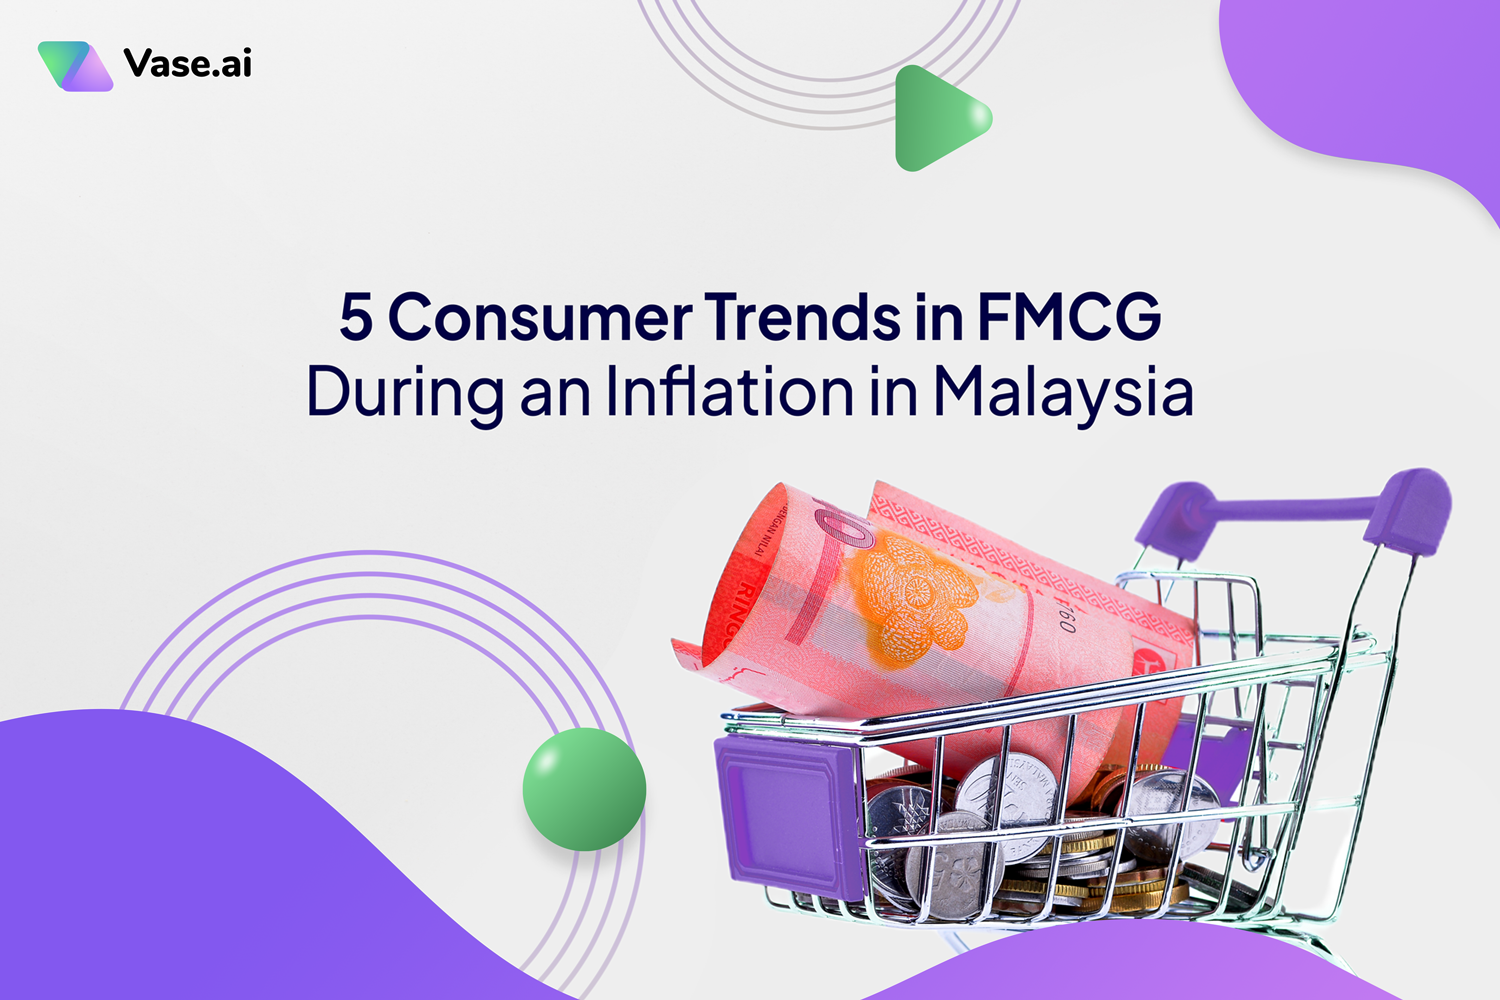 5 Consumer Trends in FMCG During an Inflation in Malaysia